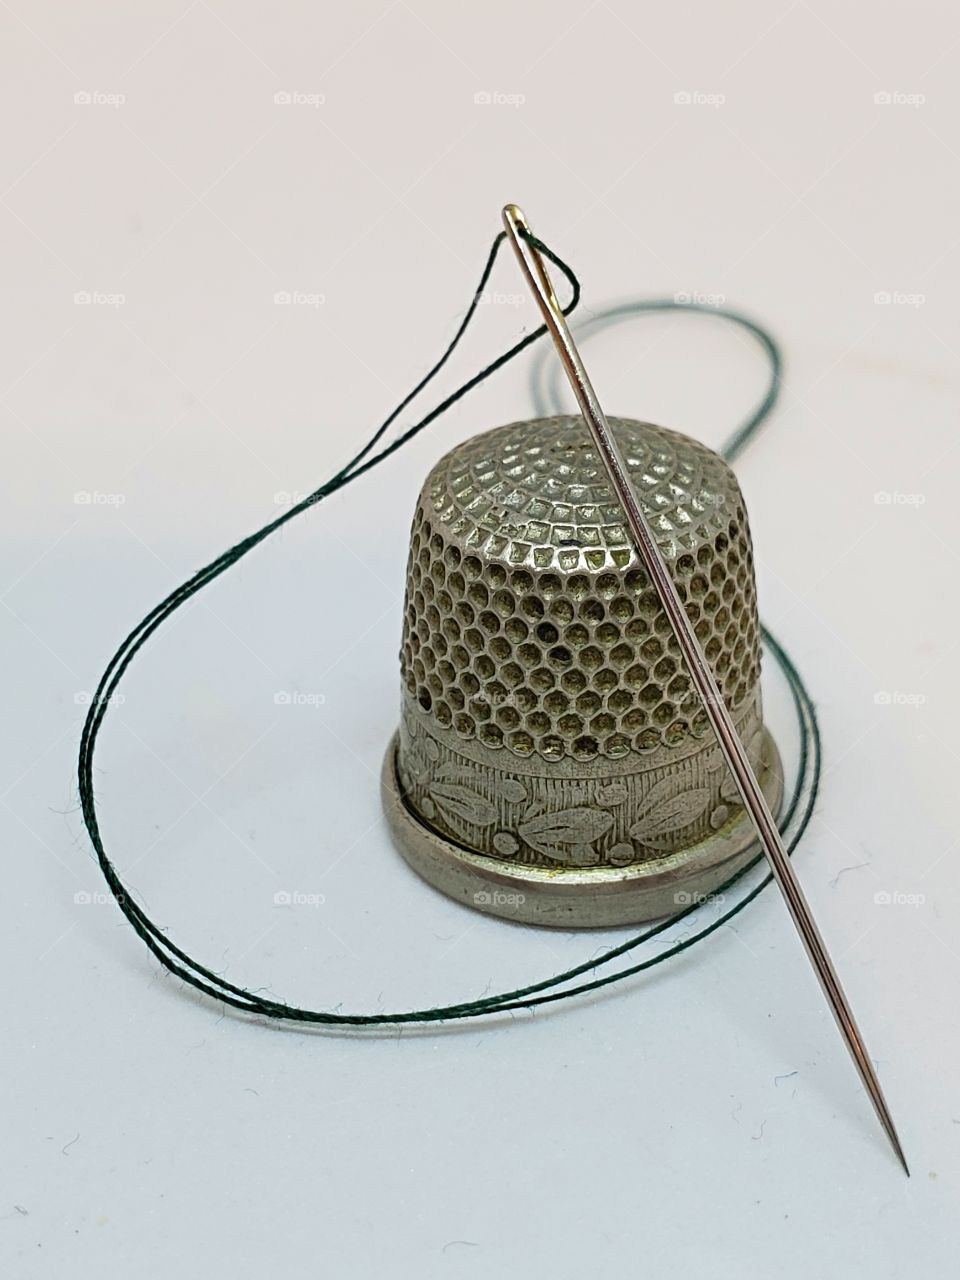 Vintage thimble with needle and thread!